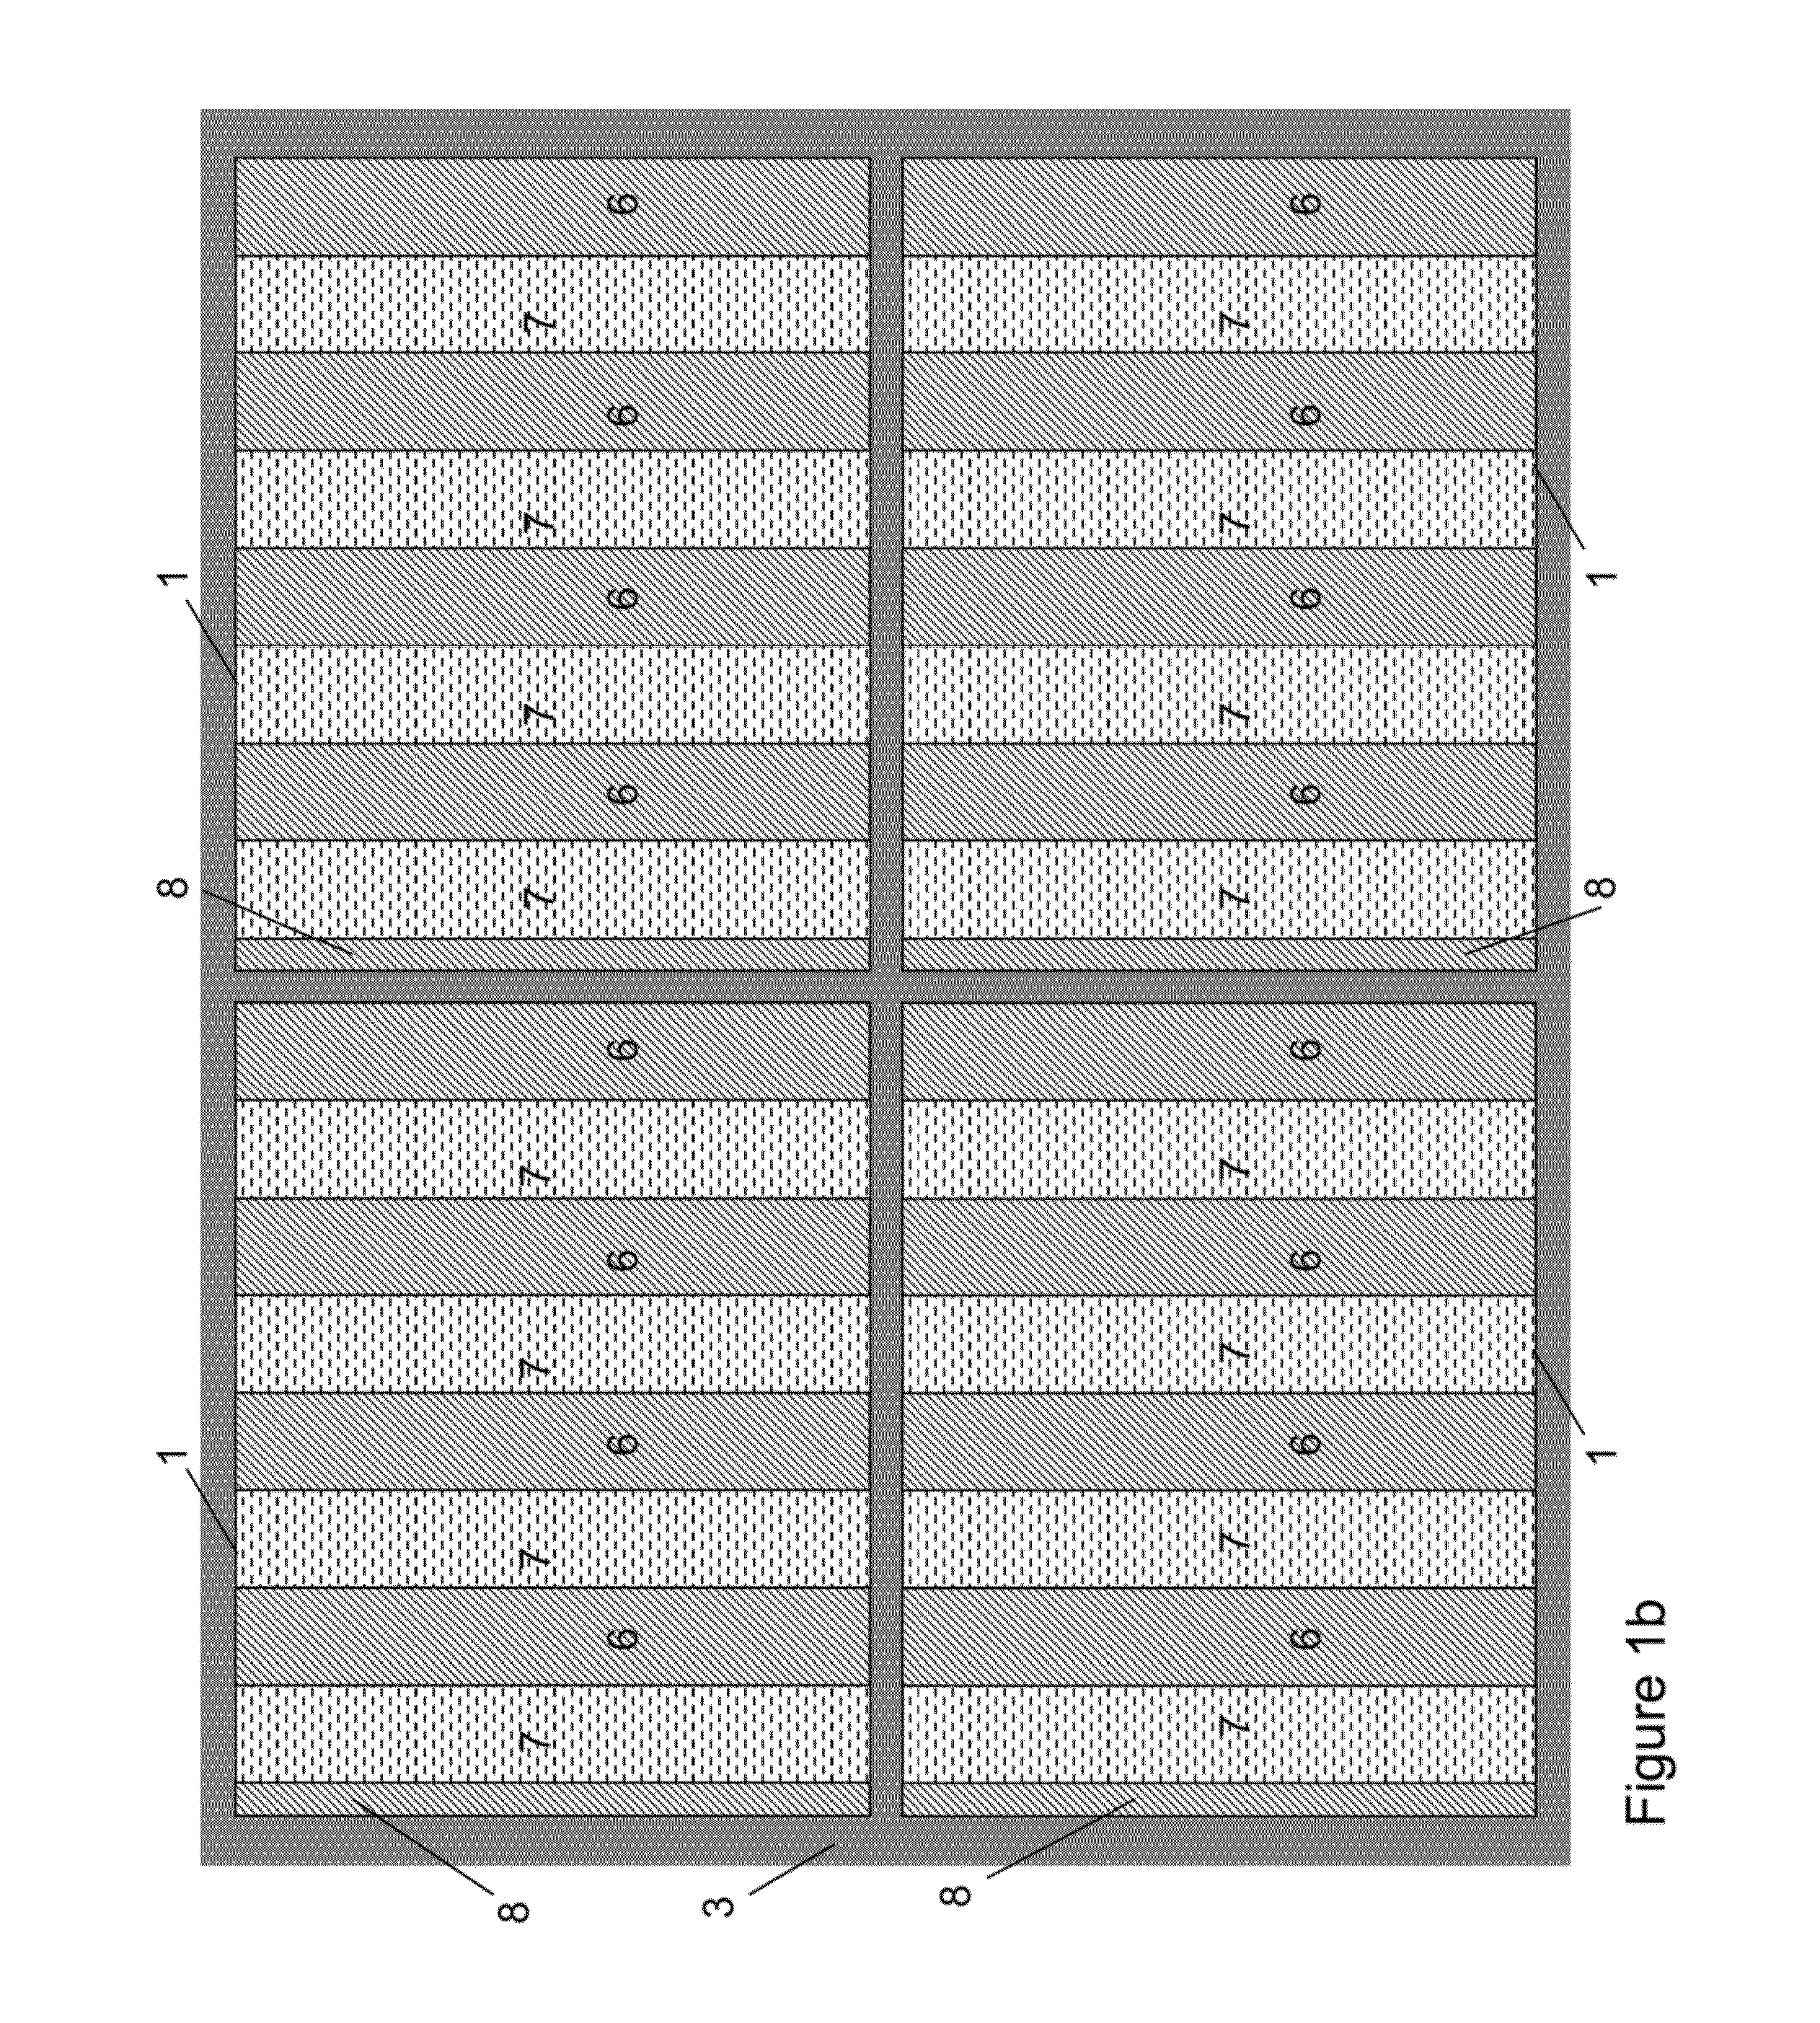 Back junction back contact solar cell module and method of manufacturing the same